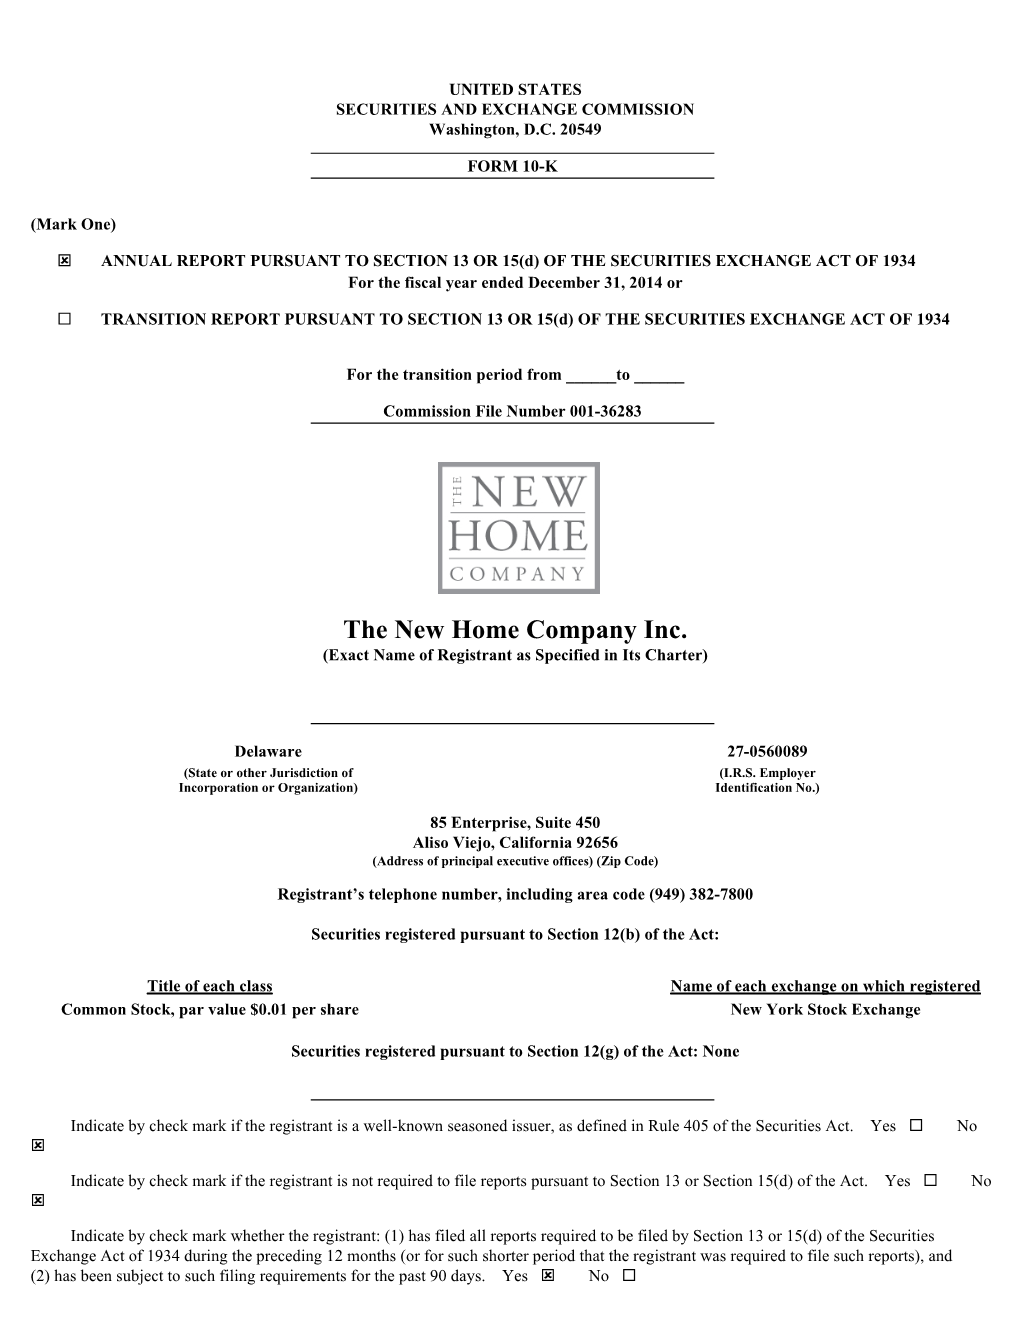 The New Home Company Inc. (Exact Name of Registrant As Specified in Its Charter)